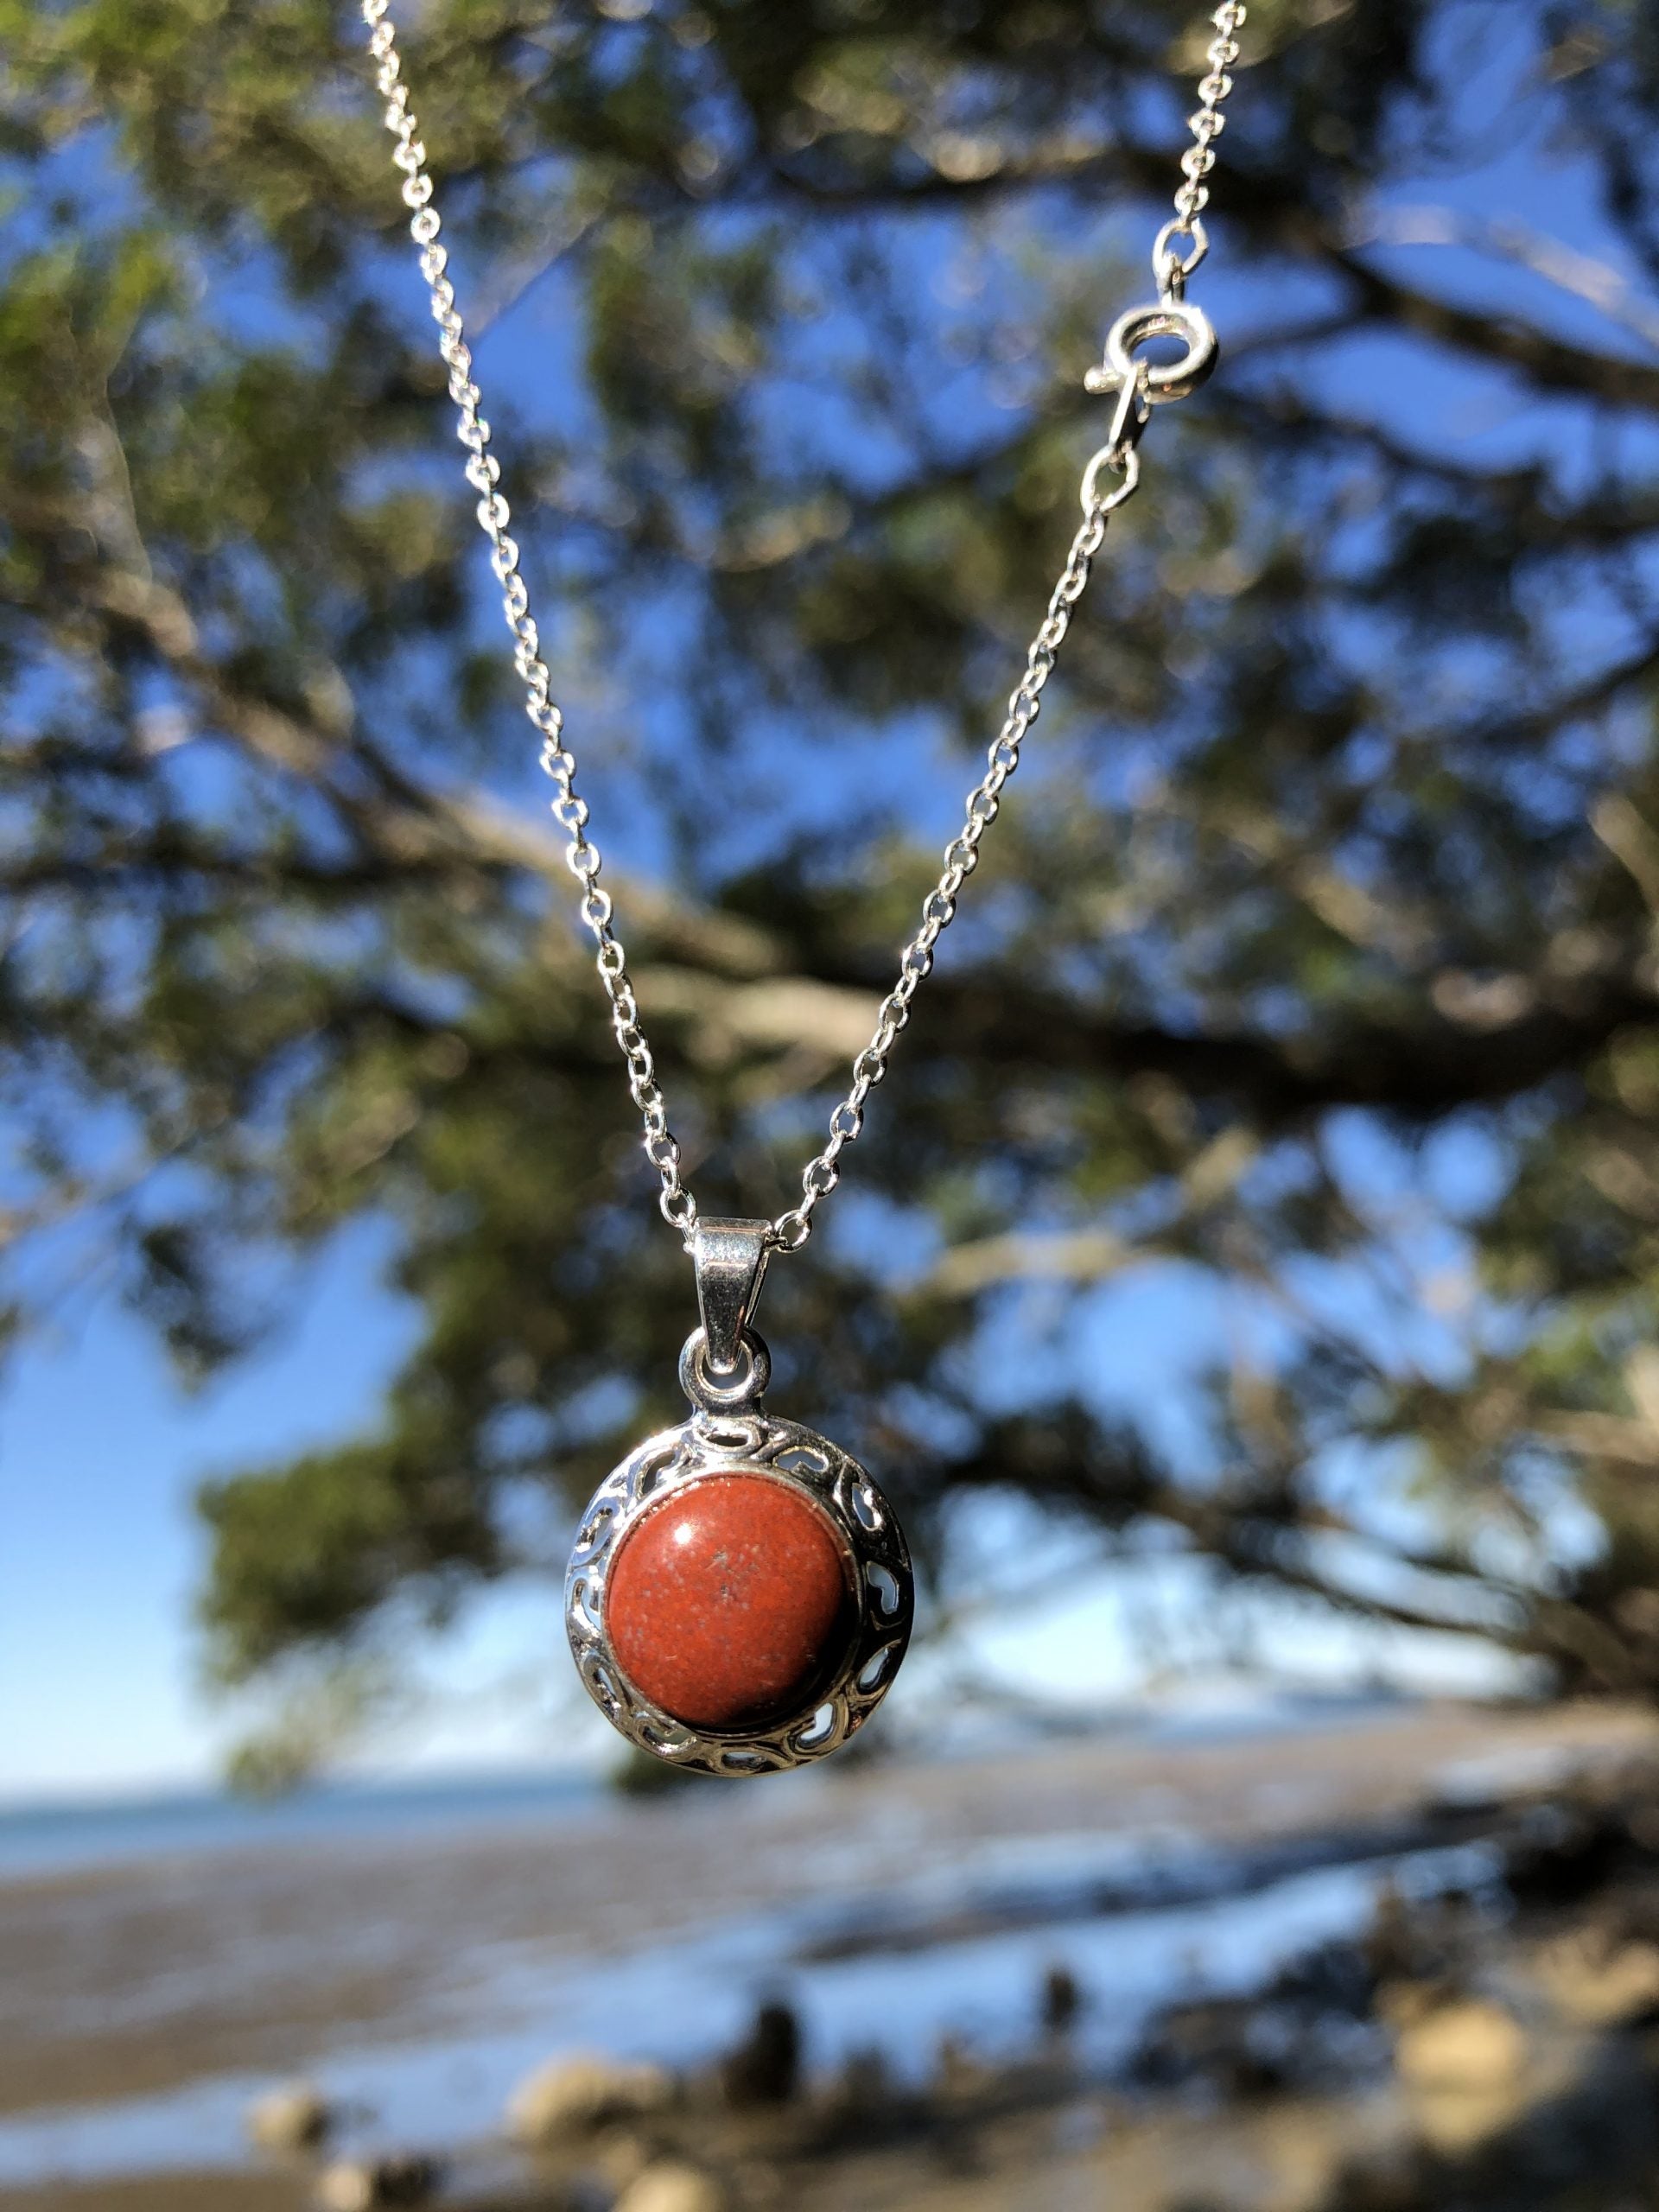 Necklace with New Zealand red Jasper, rich, deep red with tiny flecks of colour variation, hand polished to a 10mm round cabochon and set in a silver plated setting with 19 inch chain.